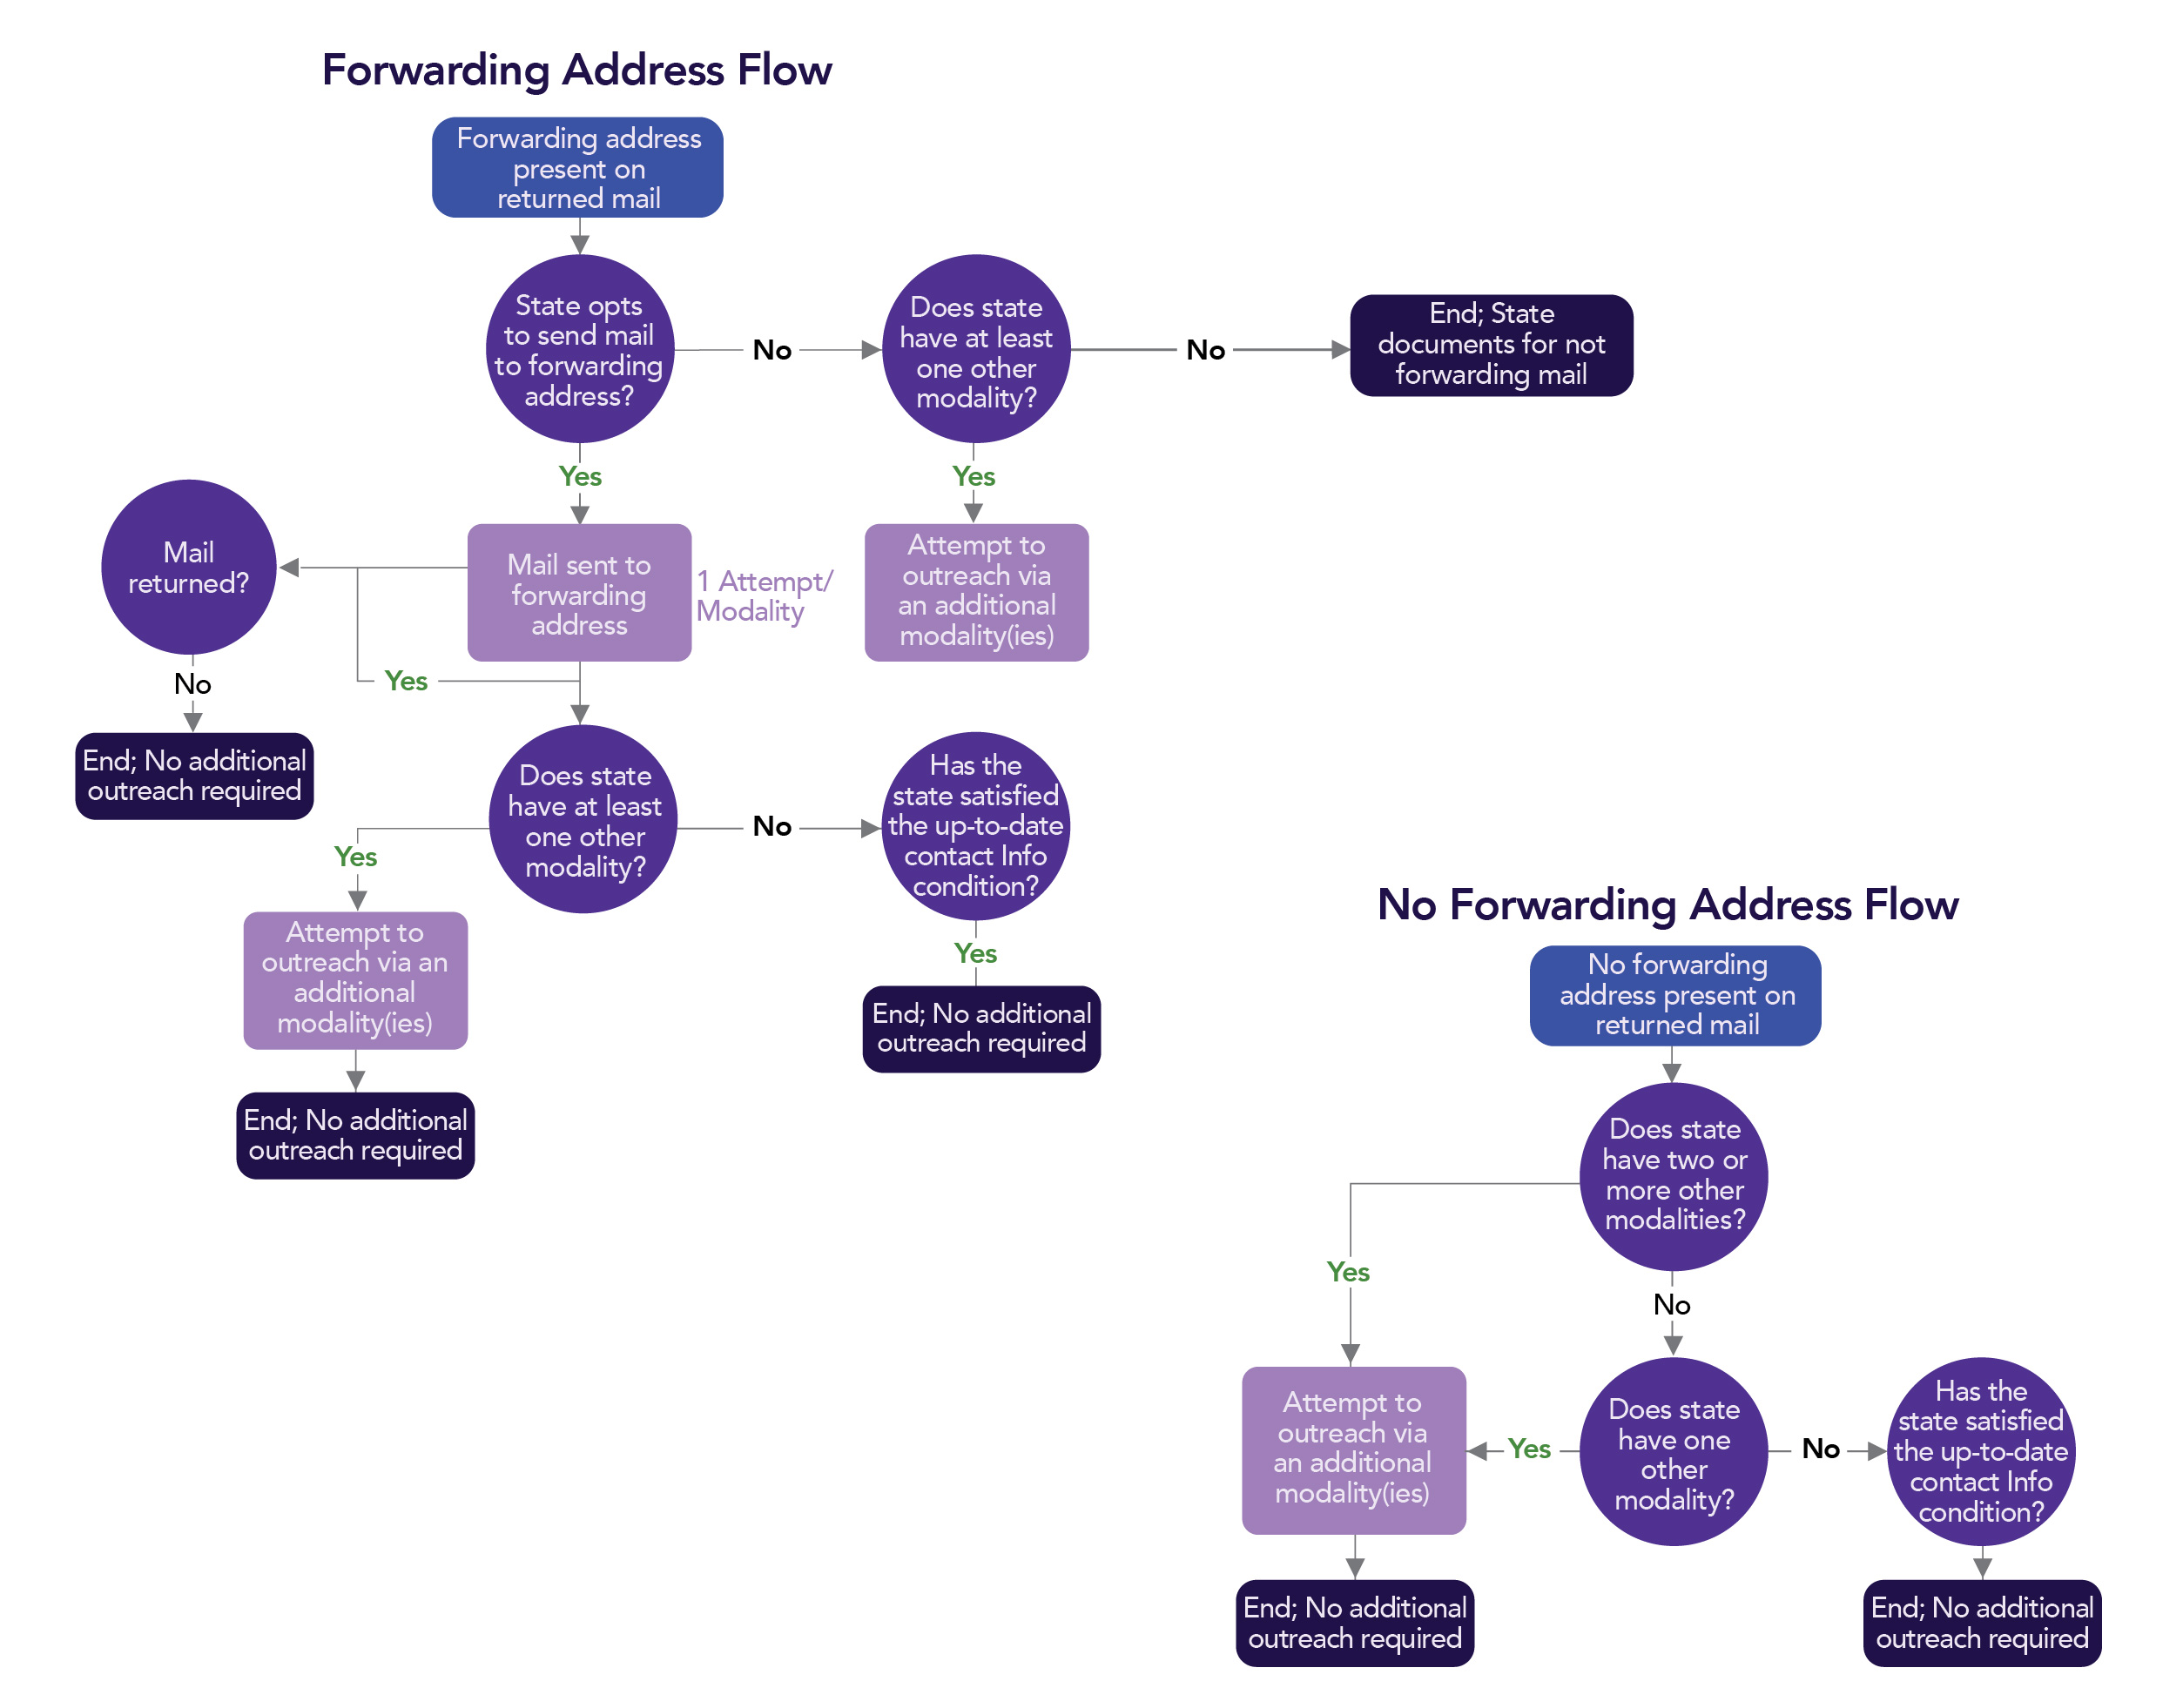 Image of the Forwarding Address flow chart